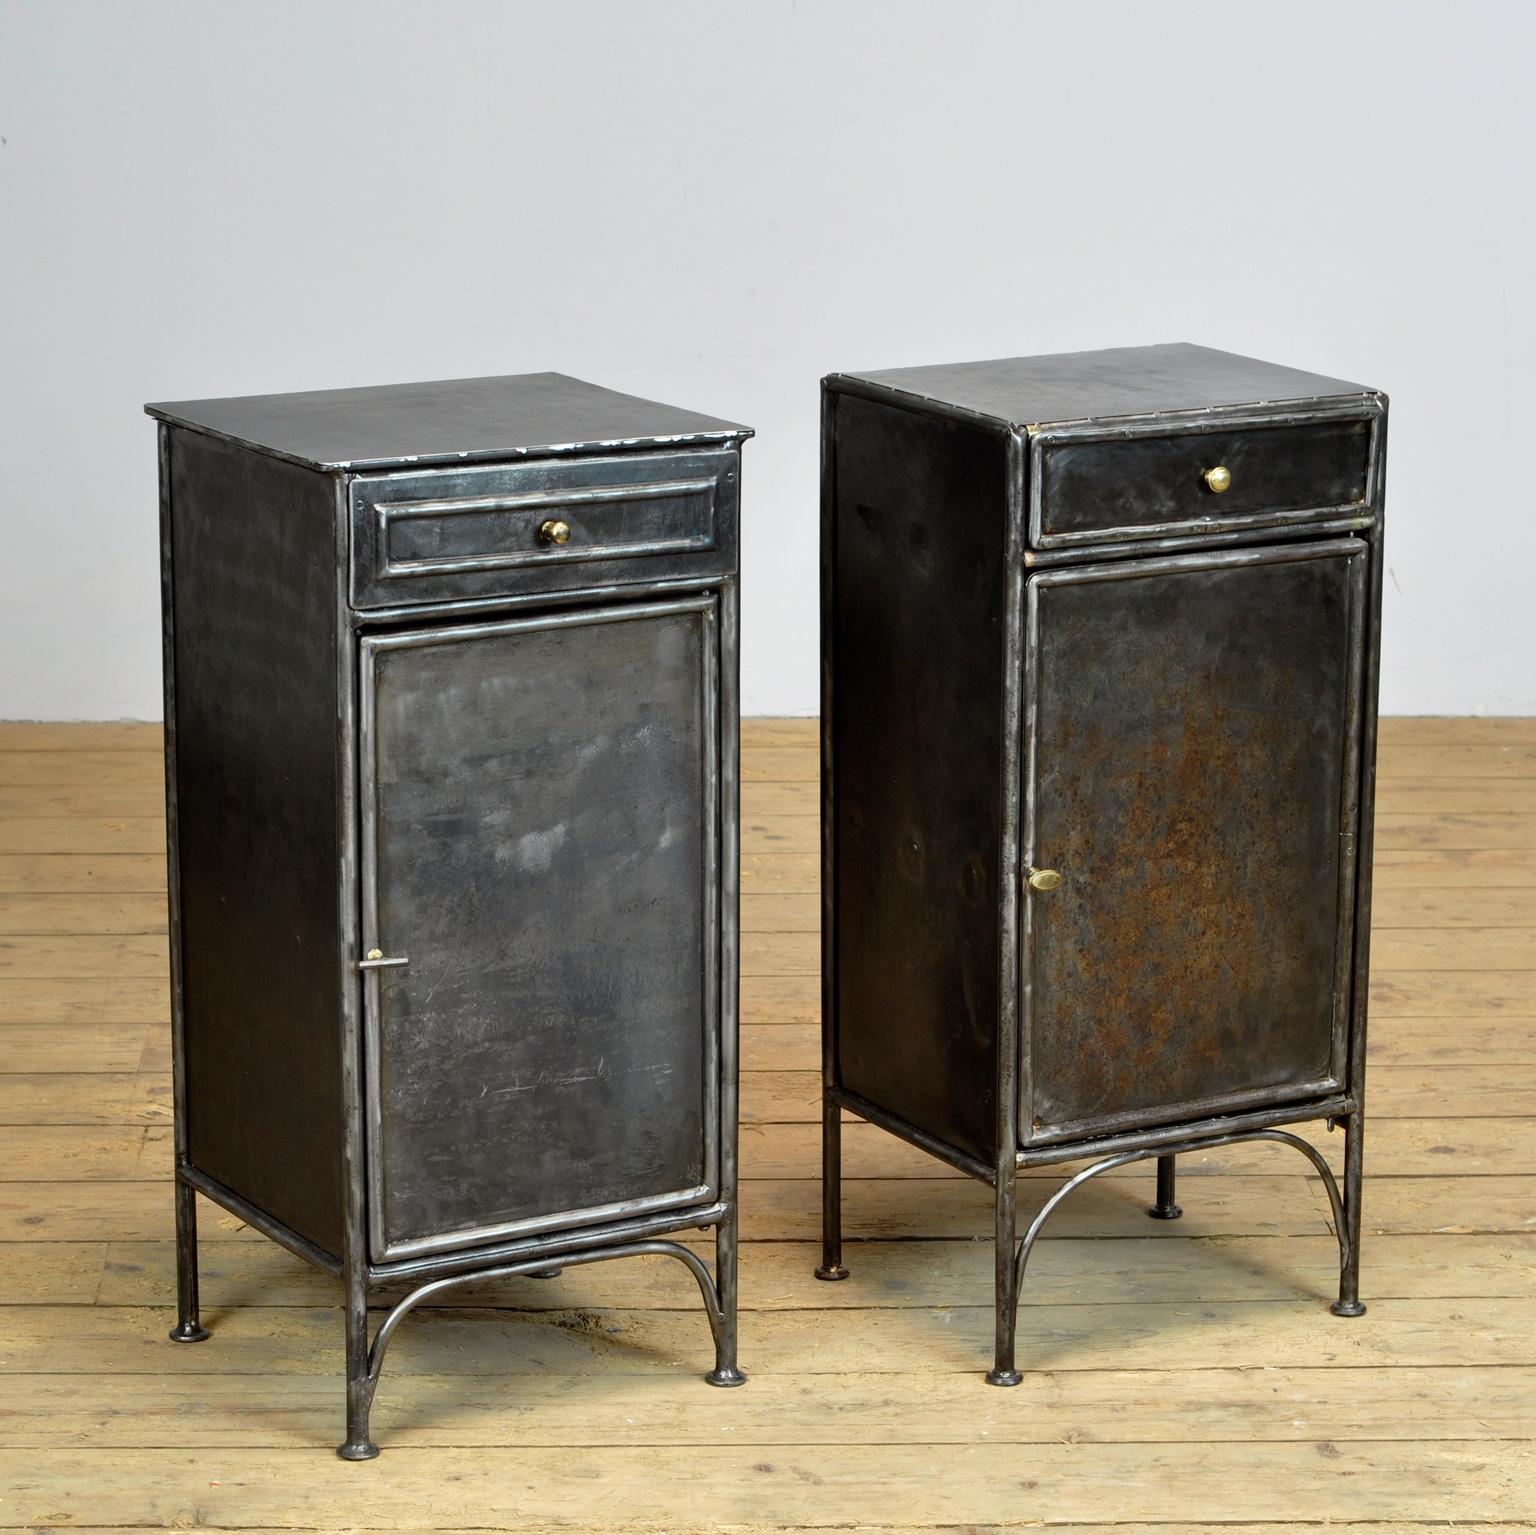 Set of polished hostital bedside table made of iron. Produced in Germany, circa 1910.
There are minor differences in the bedside tables (Size and knobs).

Dimensions left table (H x W x D): 80 x 31 x 36 cm
Dimensions right table (H x W x D): 80